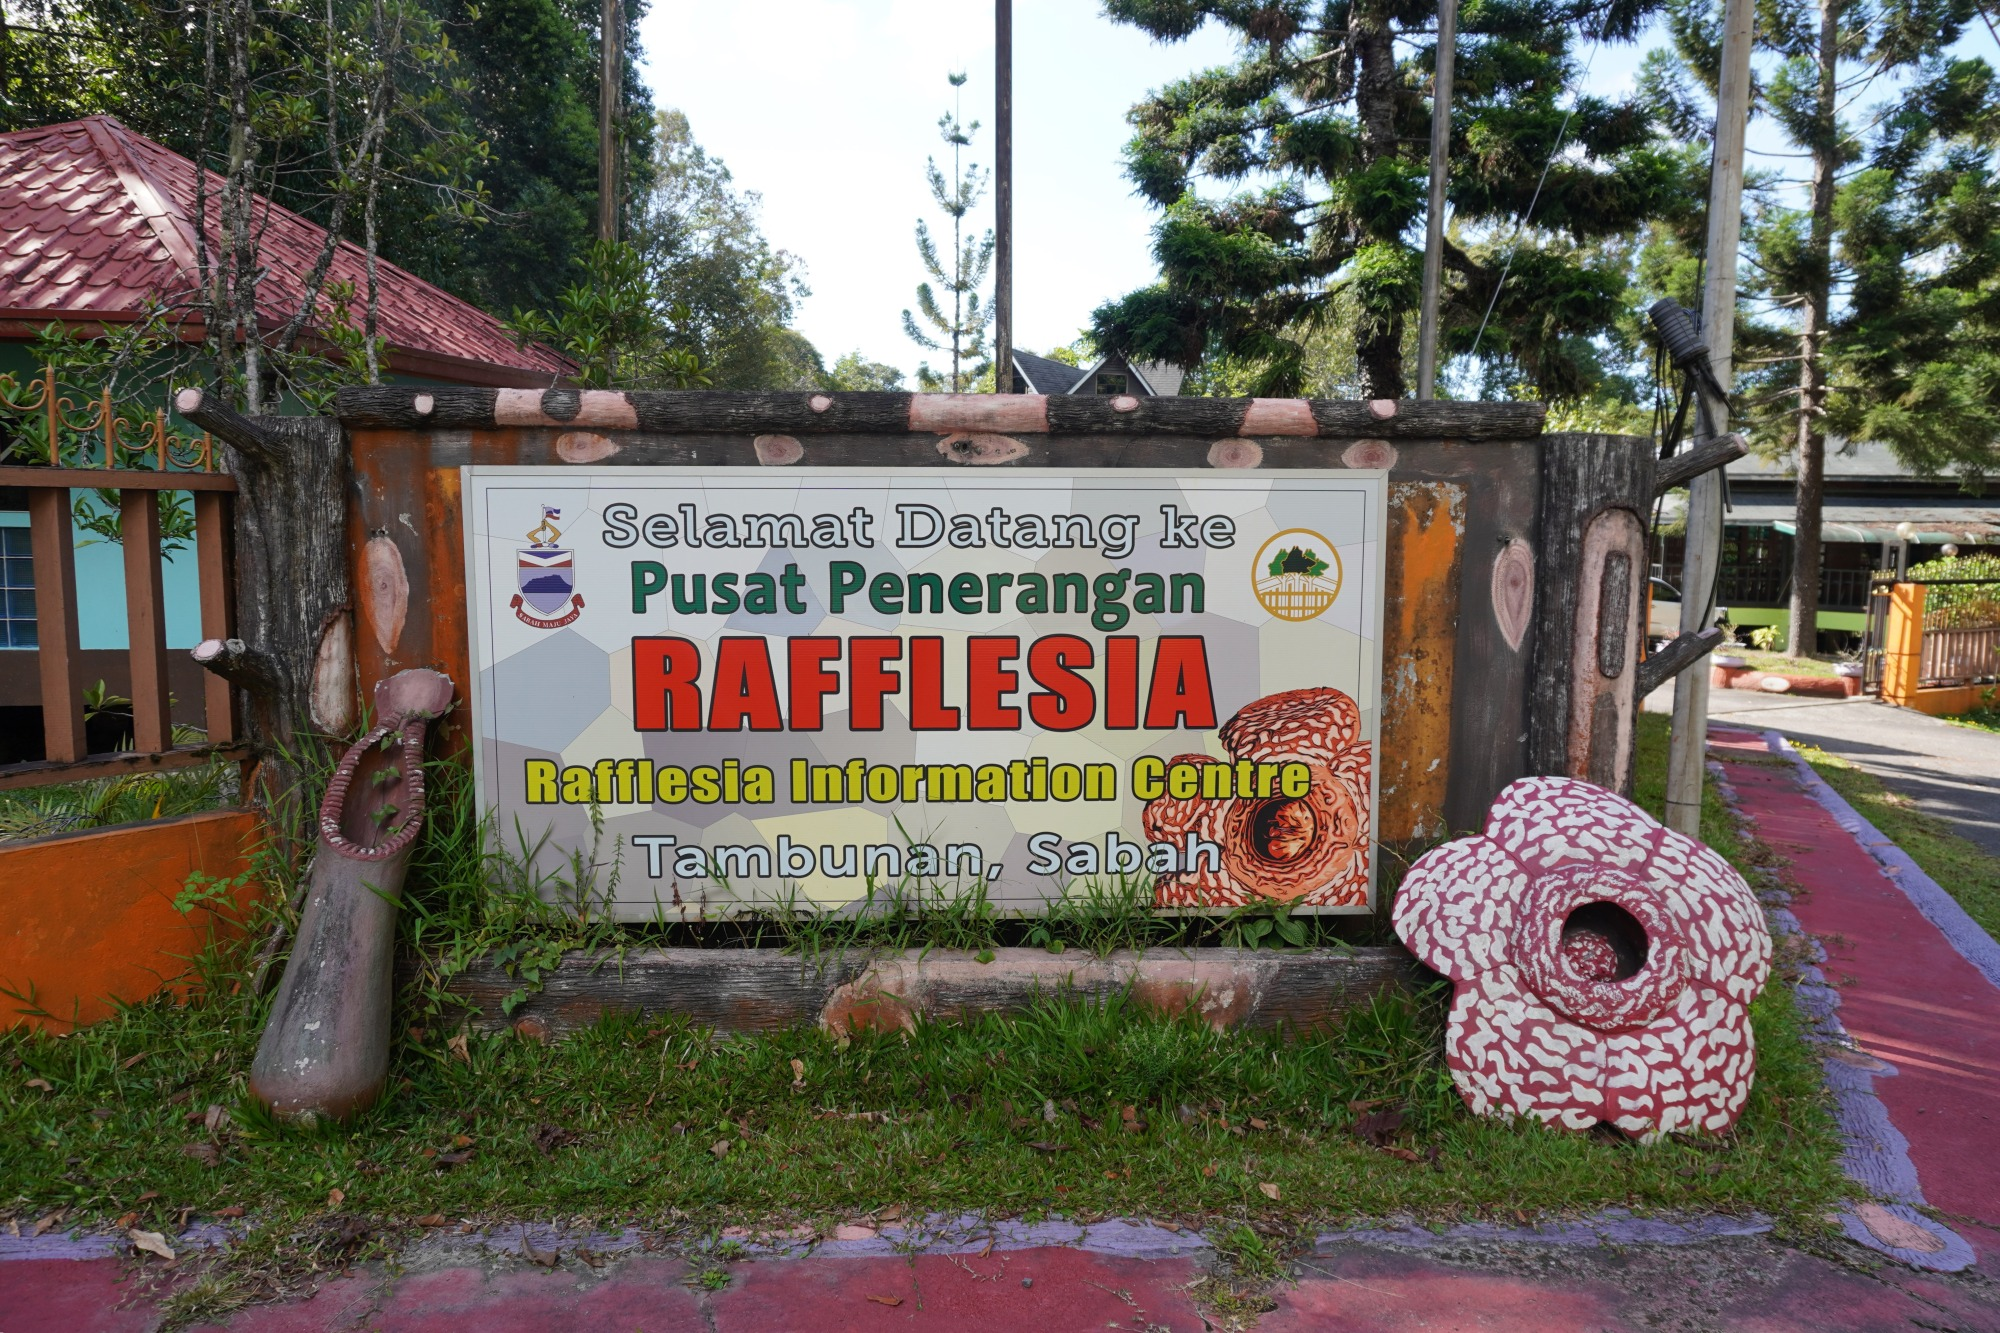 The signage at the Rafflesia Information Centre in Sabah